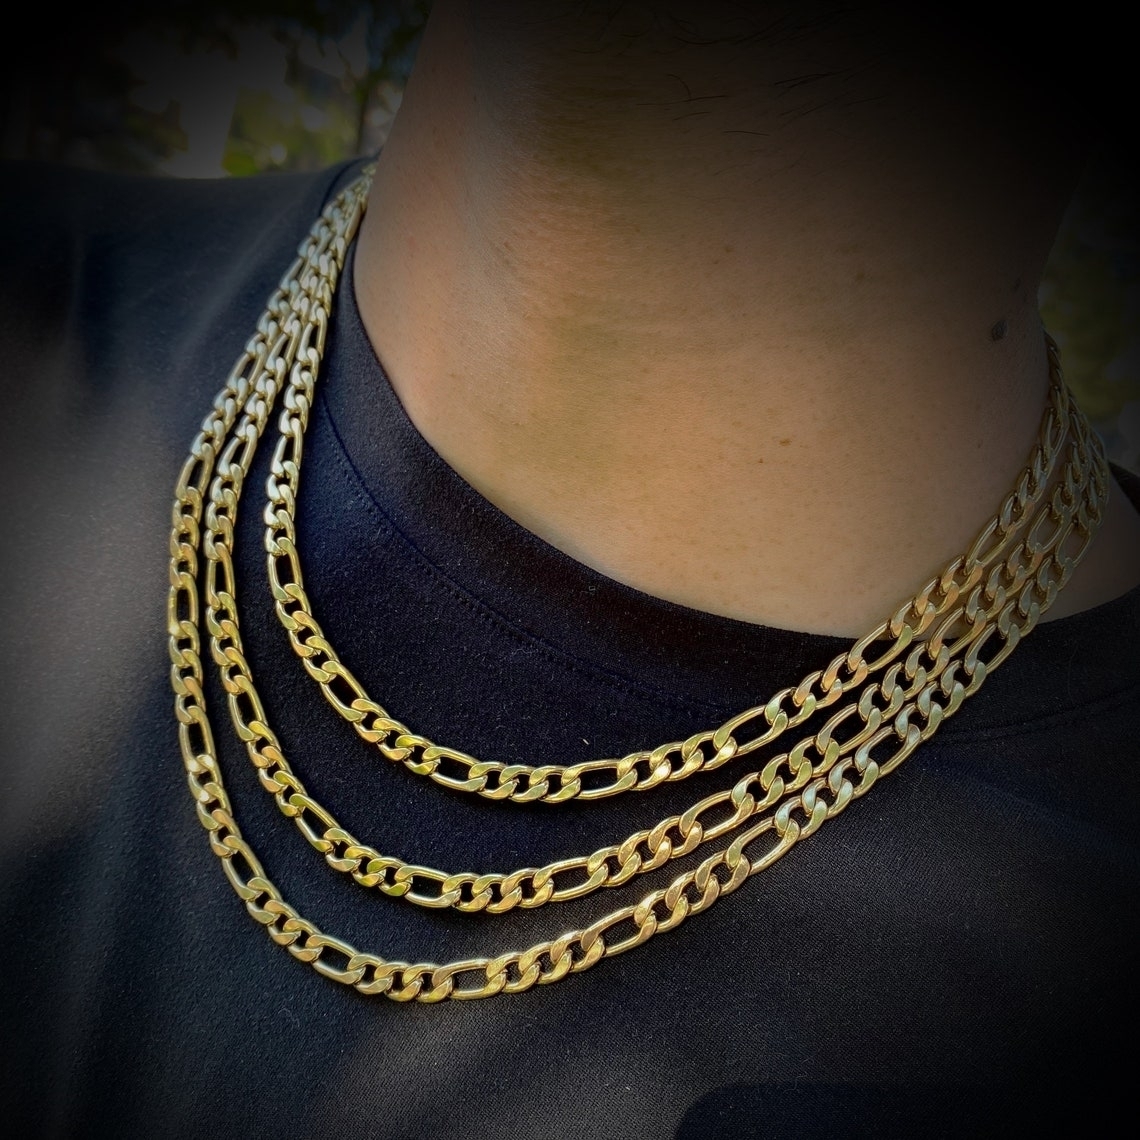 4mm Figaro Chain Necklace Yellow Gold Filled High Polish Finsh - White